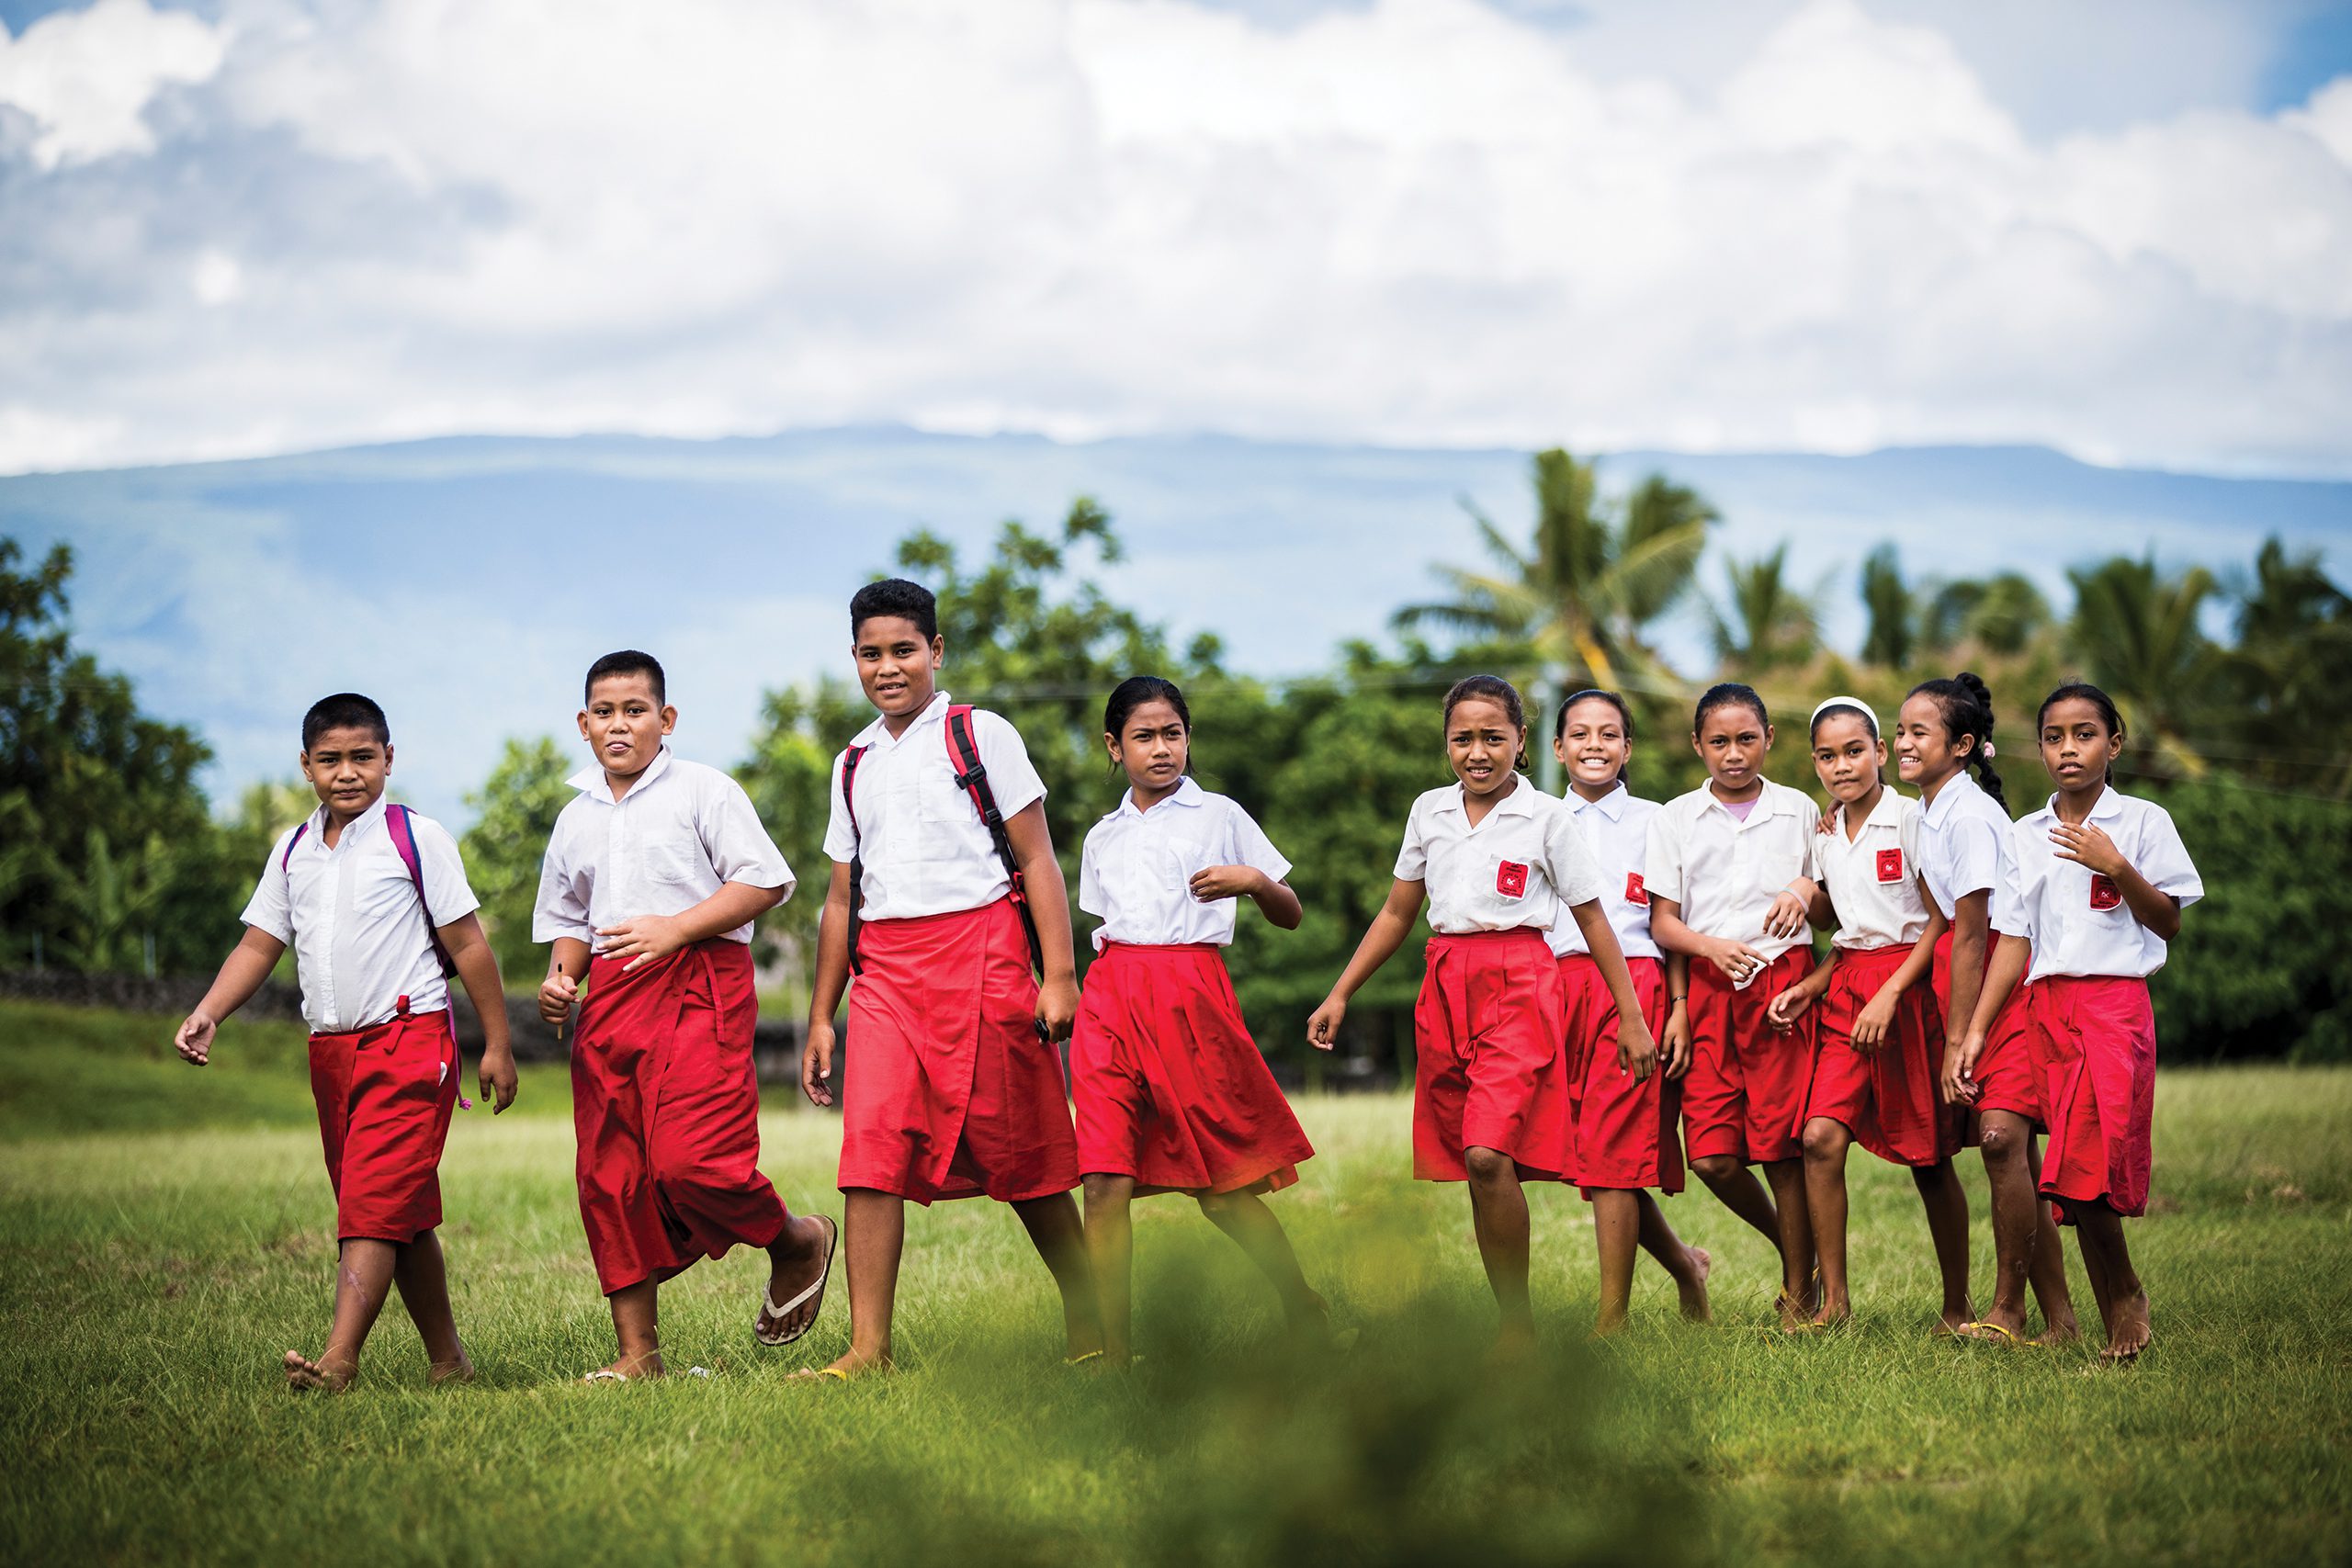 A group of young Samoan students walking across a field with palm trees in the background.